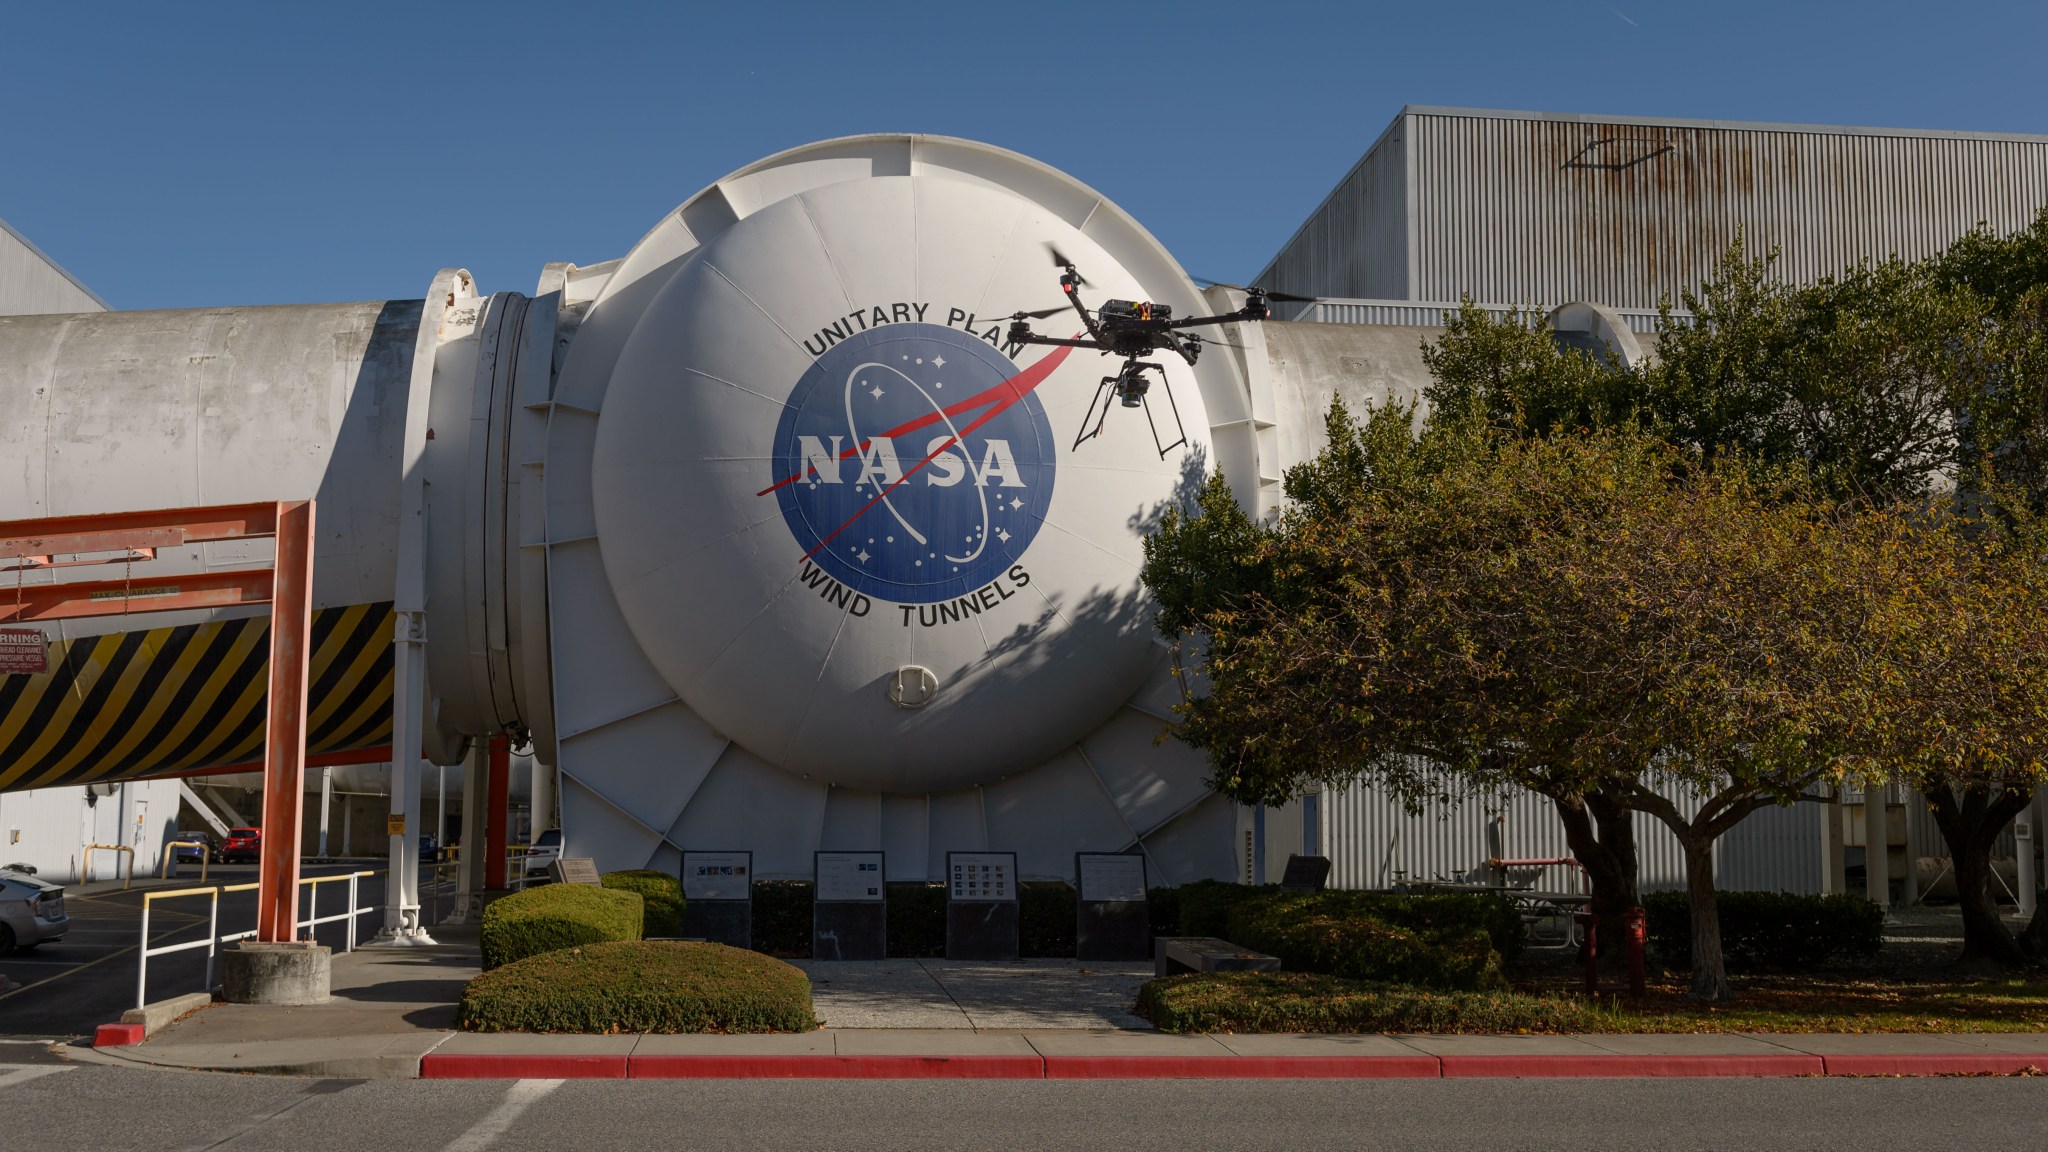 A quadcopter drone flies in front of the exterior of a wind tunnel bearing the NASA logo